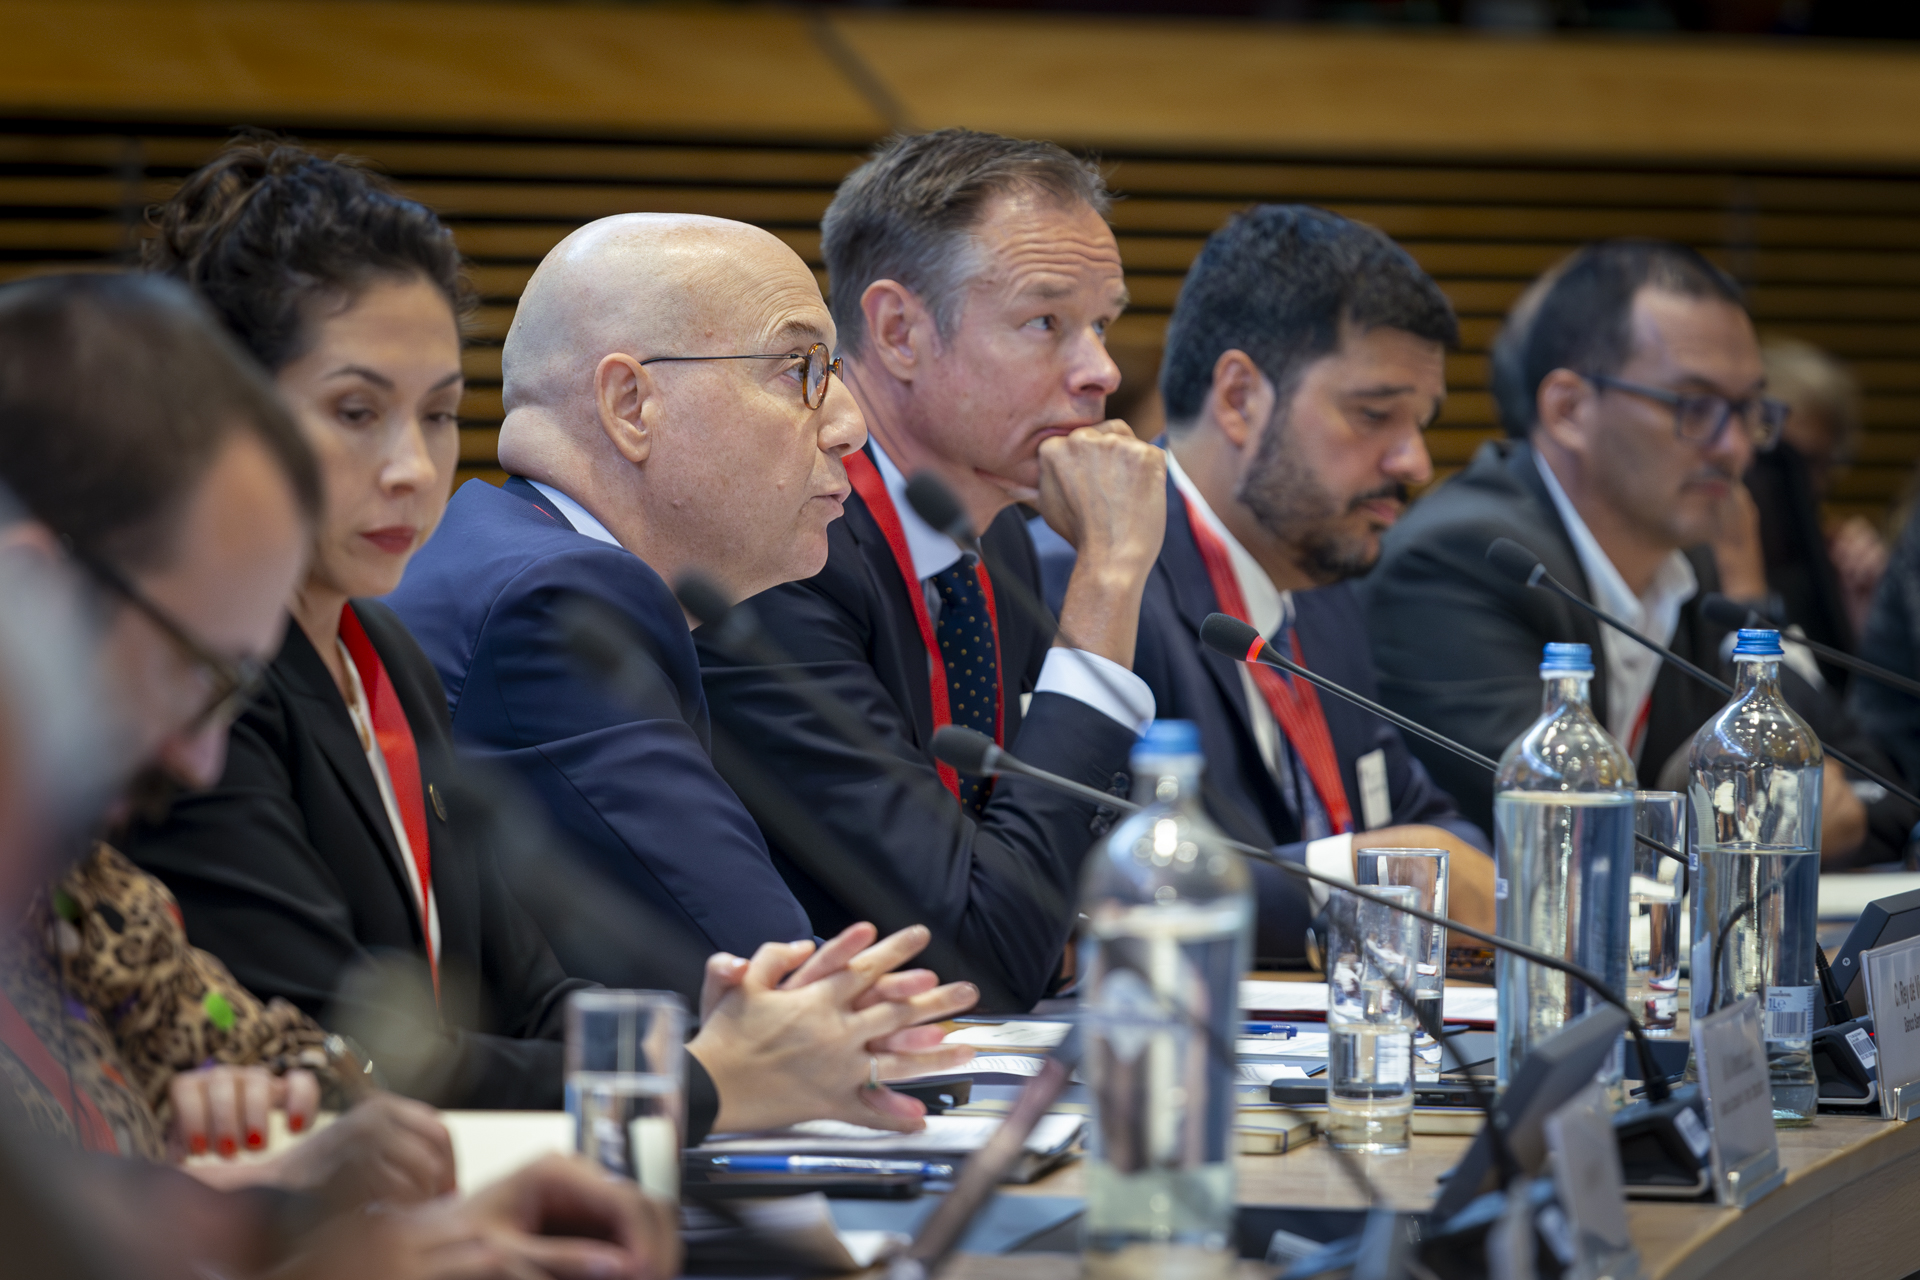 EU-LAC Business Round Table